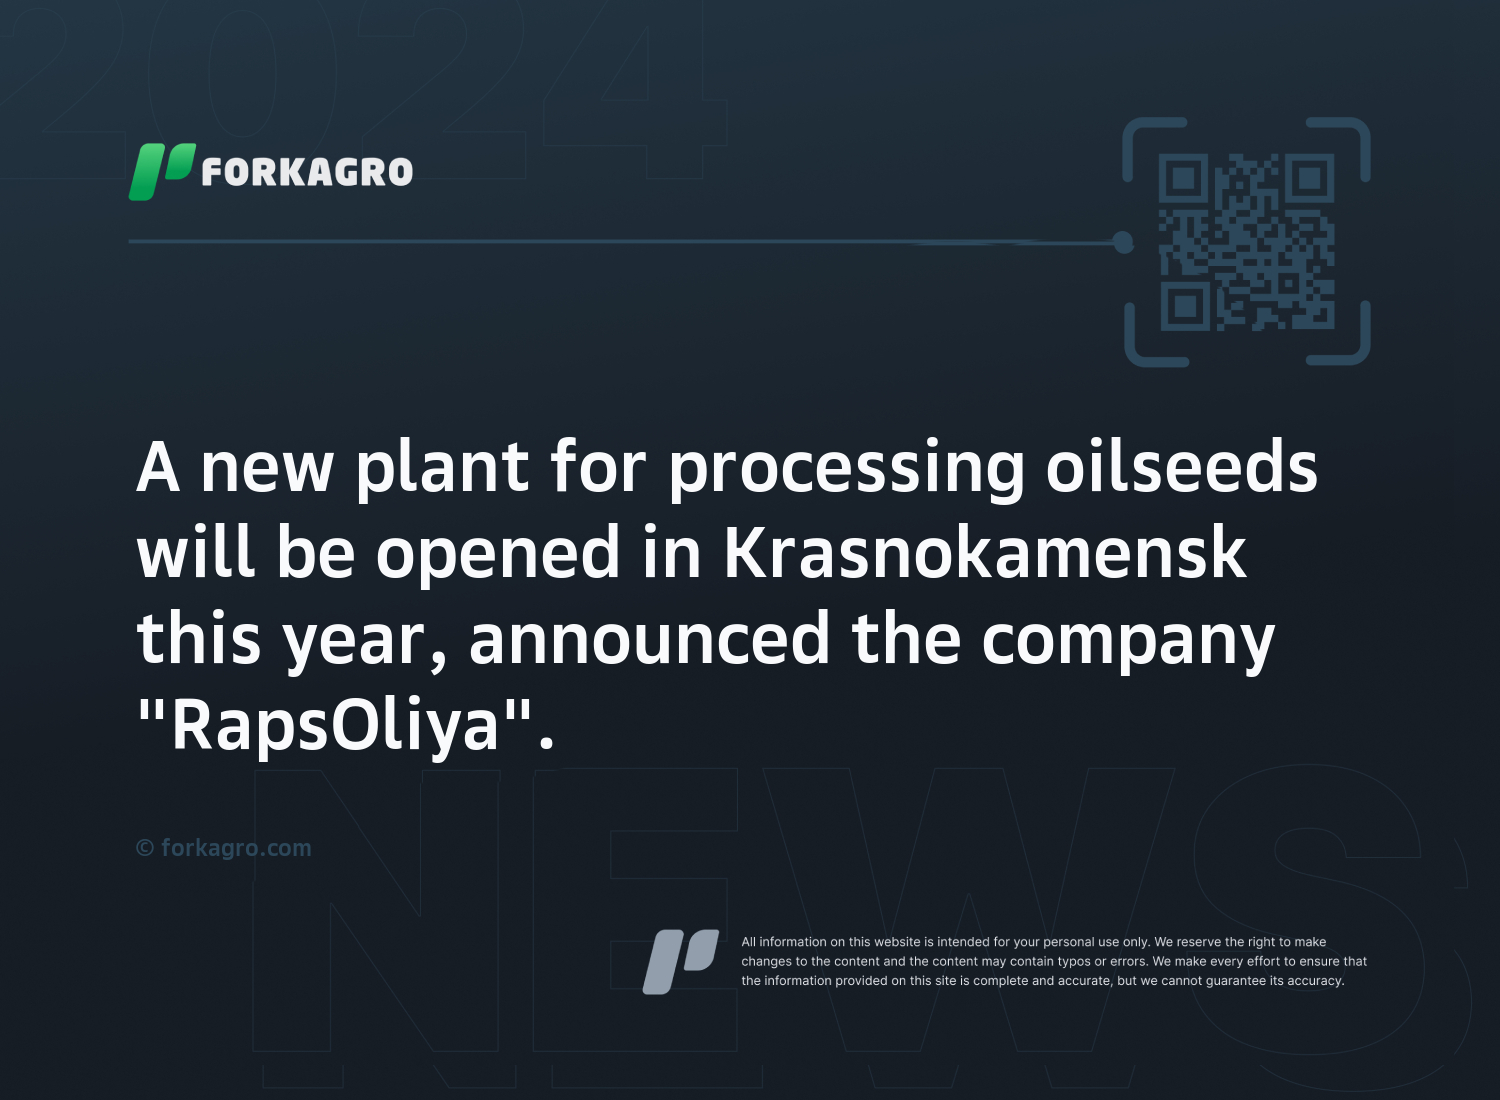 A new plant for processing oilseeds will be opened in Krasnokamensk this year, announced the company "RapsOliya".